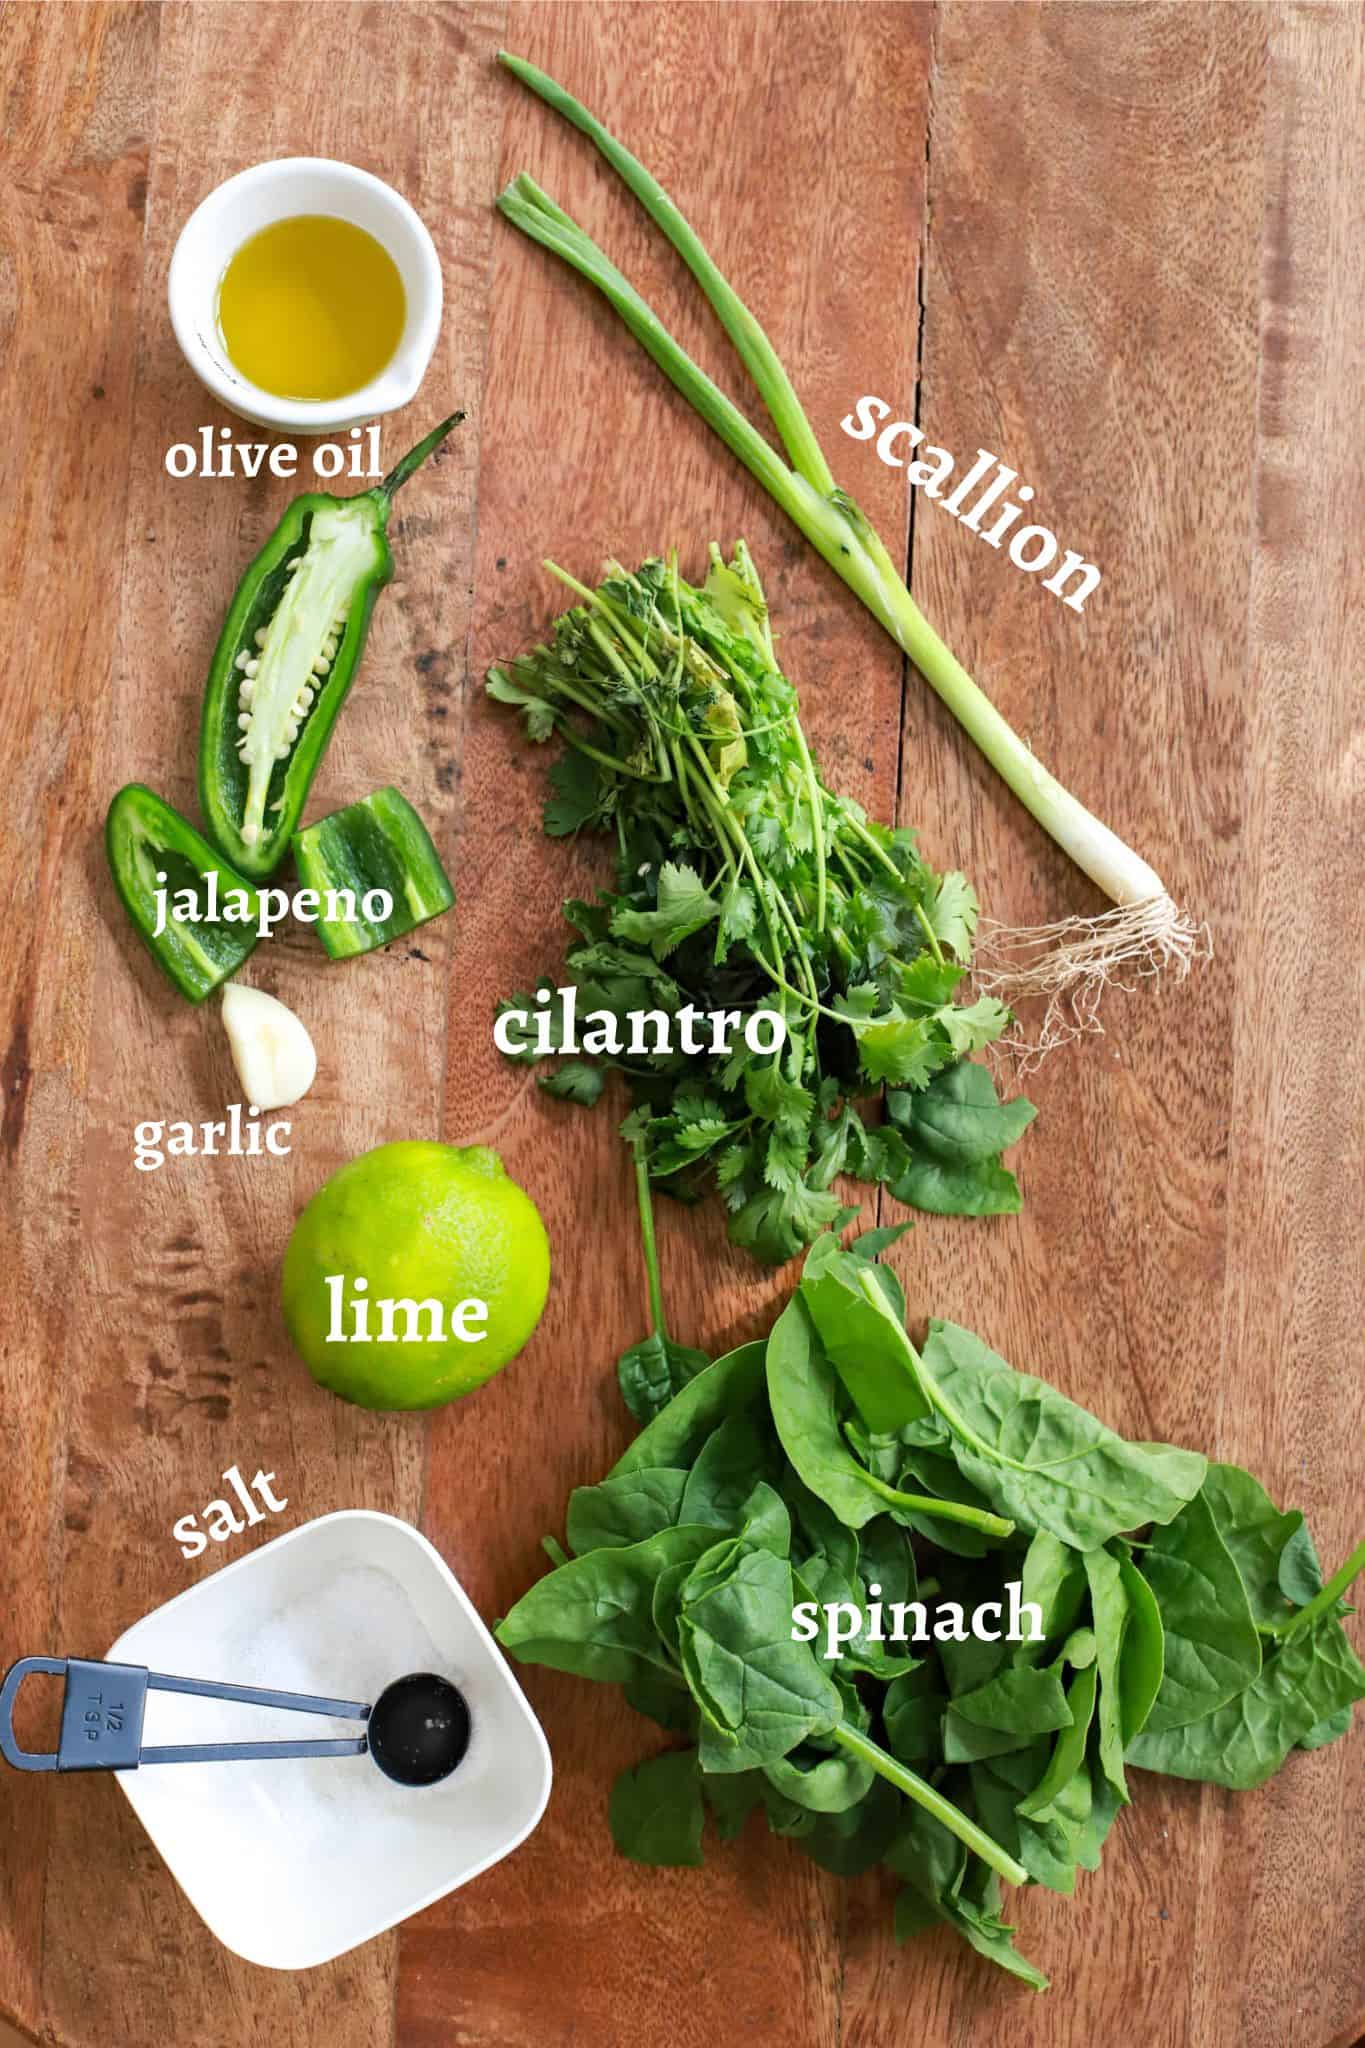 Ingredients for cilantro lime rice on wooden board with labeled text.